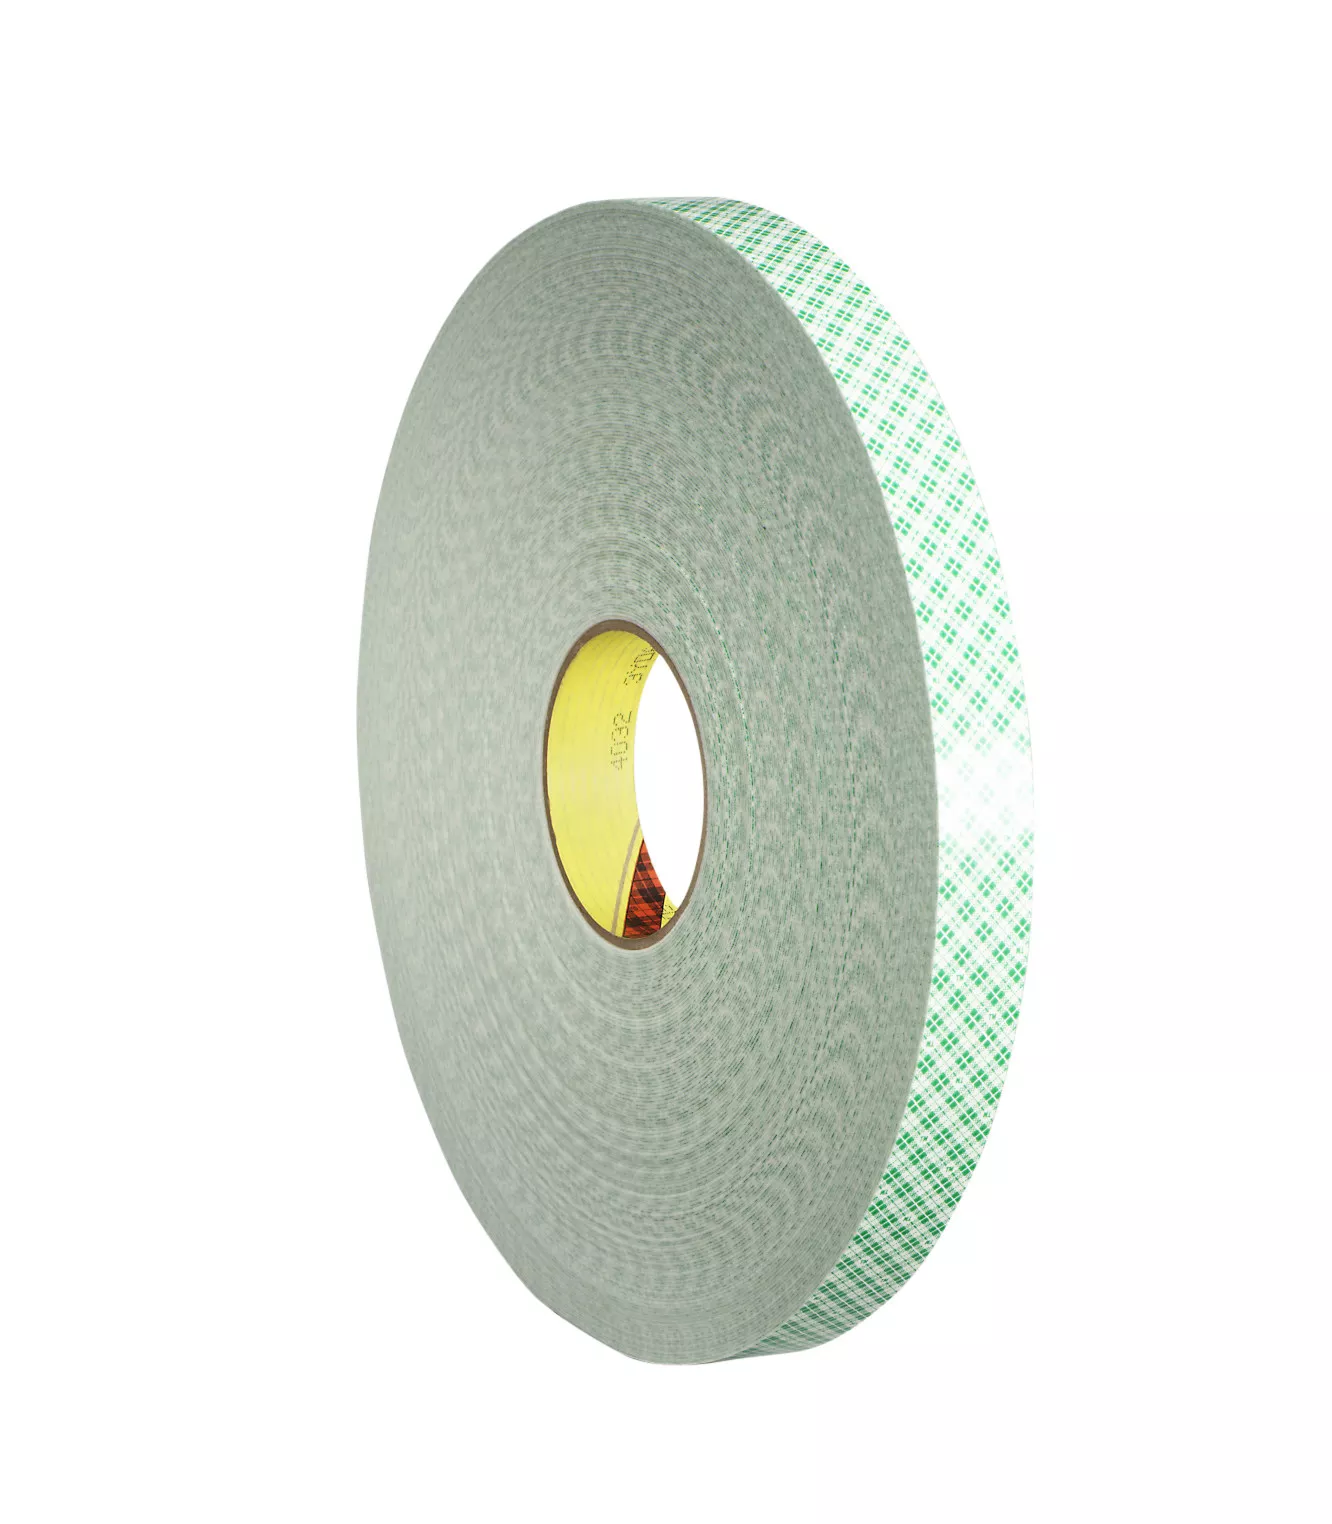 3M™ Double Coated Urethane Foam Tape 4032, Off White, 3/8 in x 72 yd, 31
mil, 24 Rolls/Case